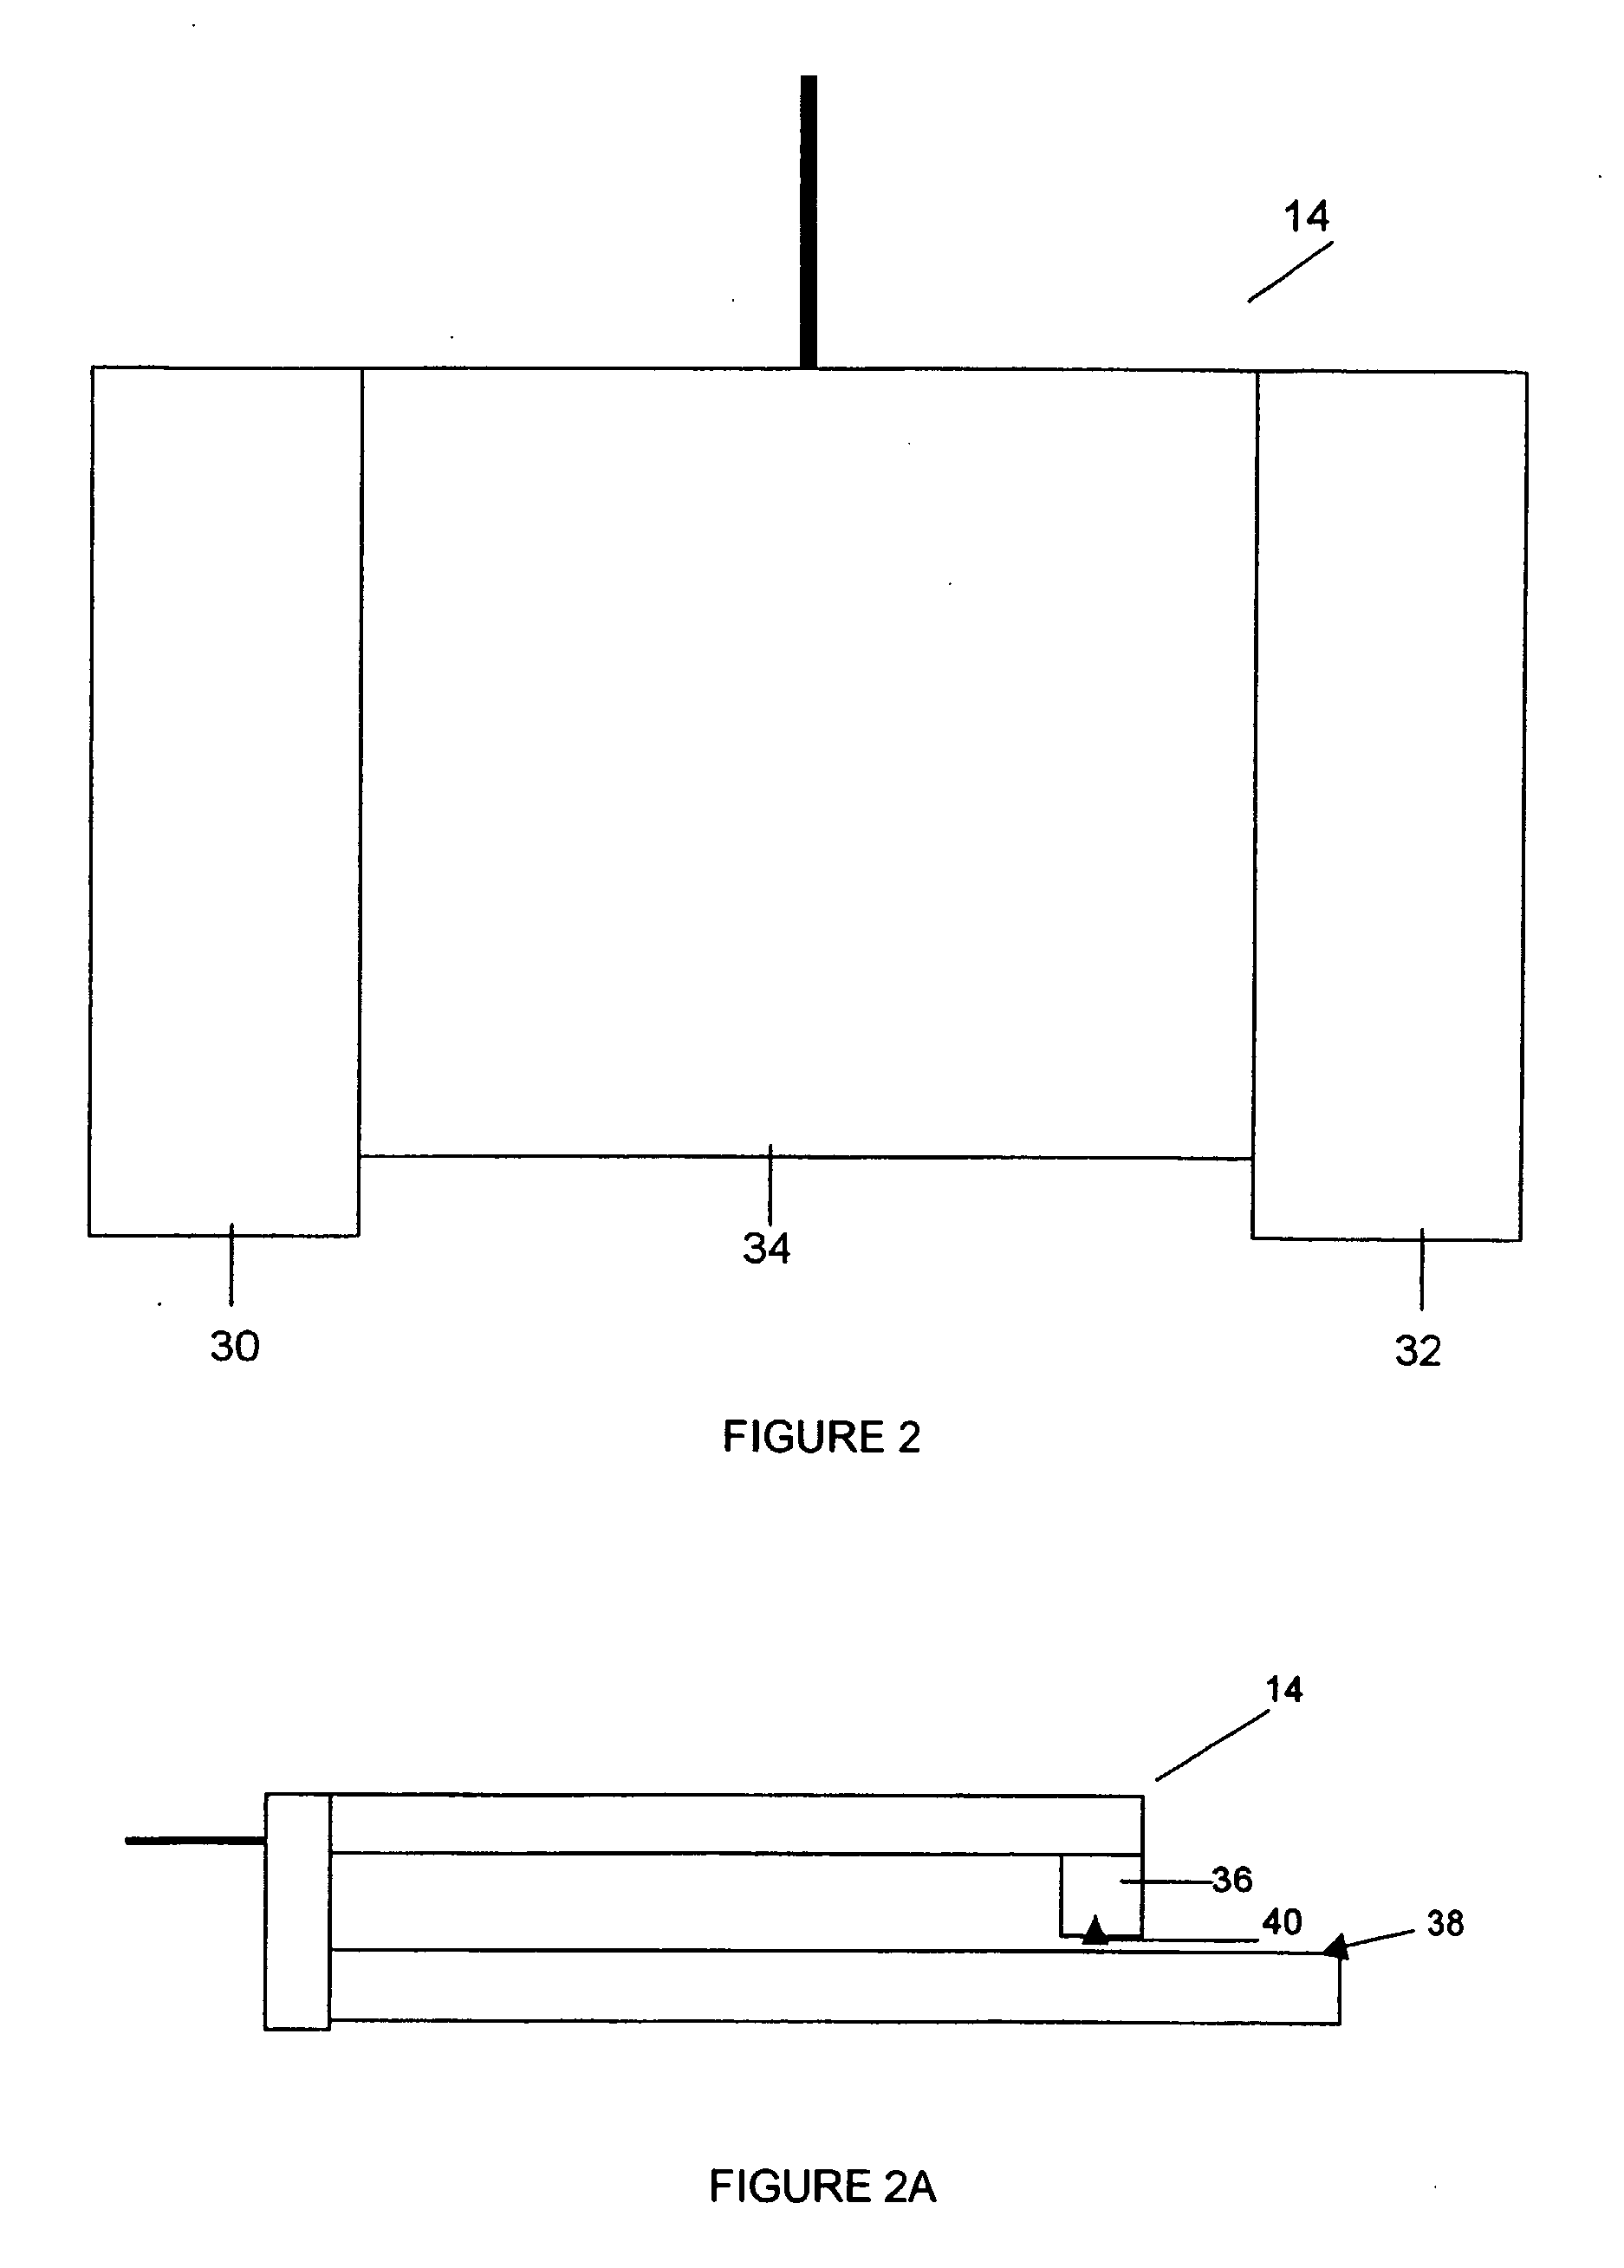 Apparatus and method for testing visual acuity and fixation control